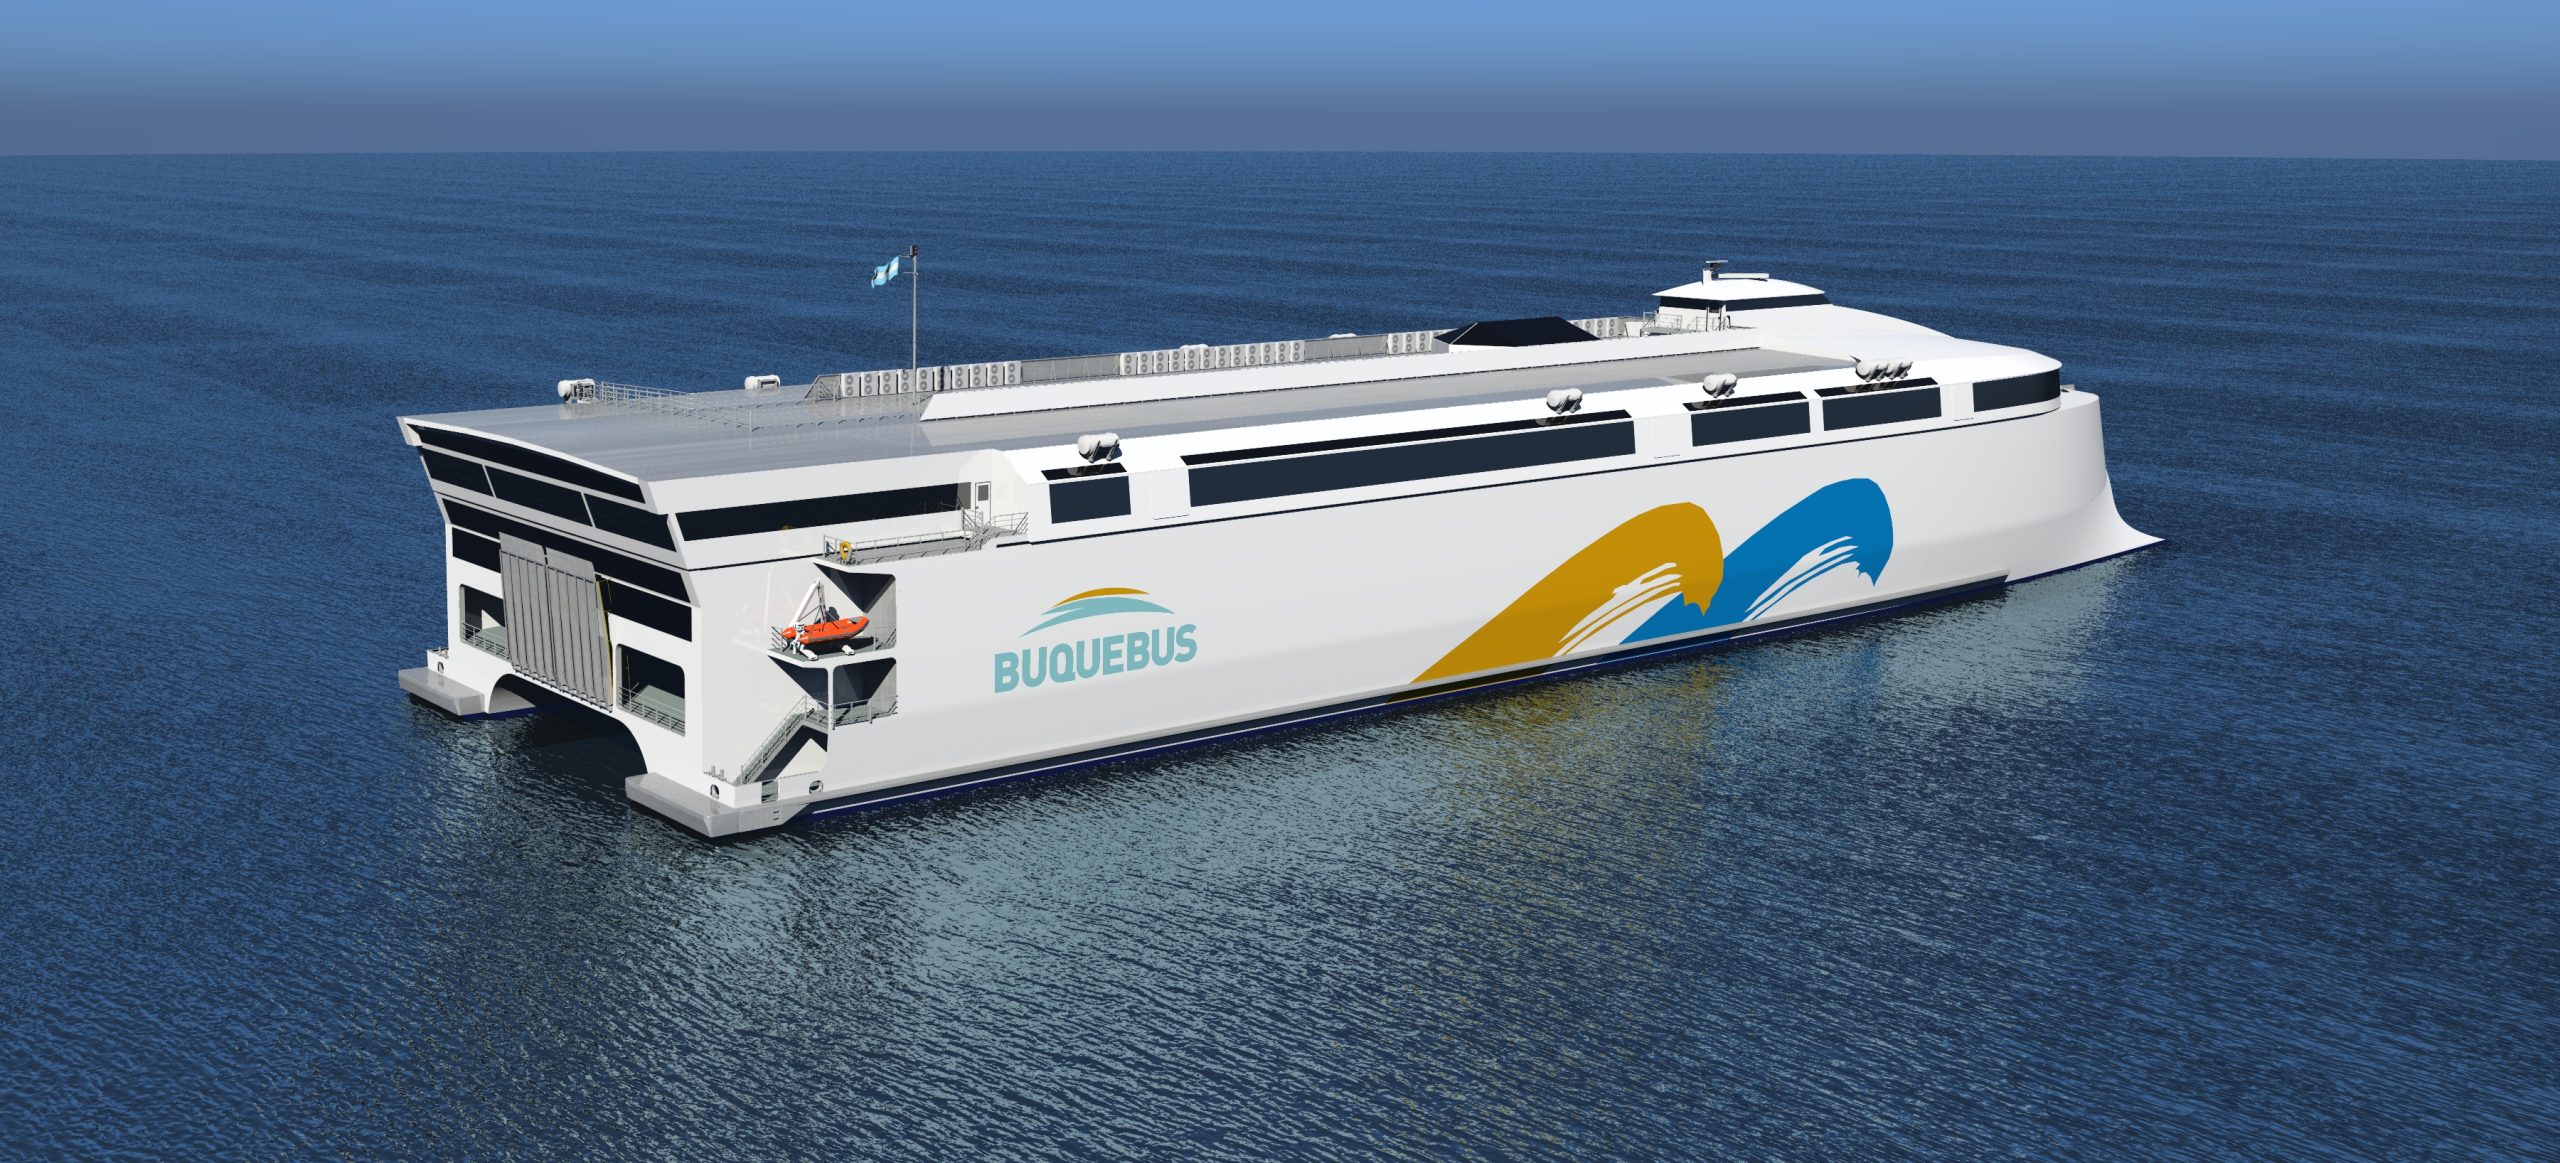 Buquebus, Incat working to switch LNG-fueled ferry order to electric power